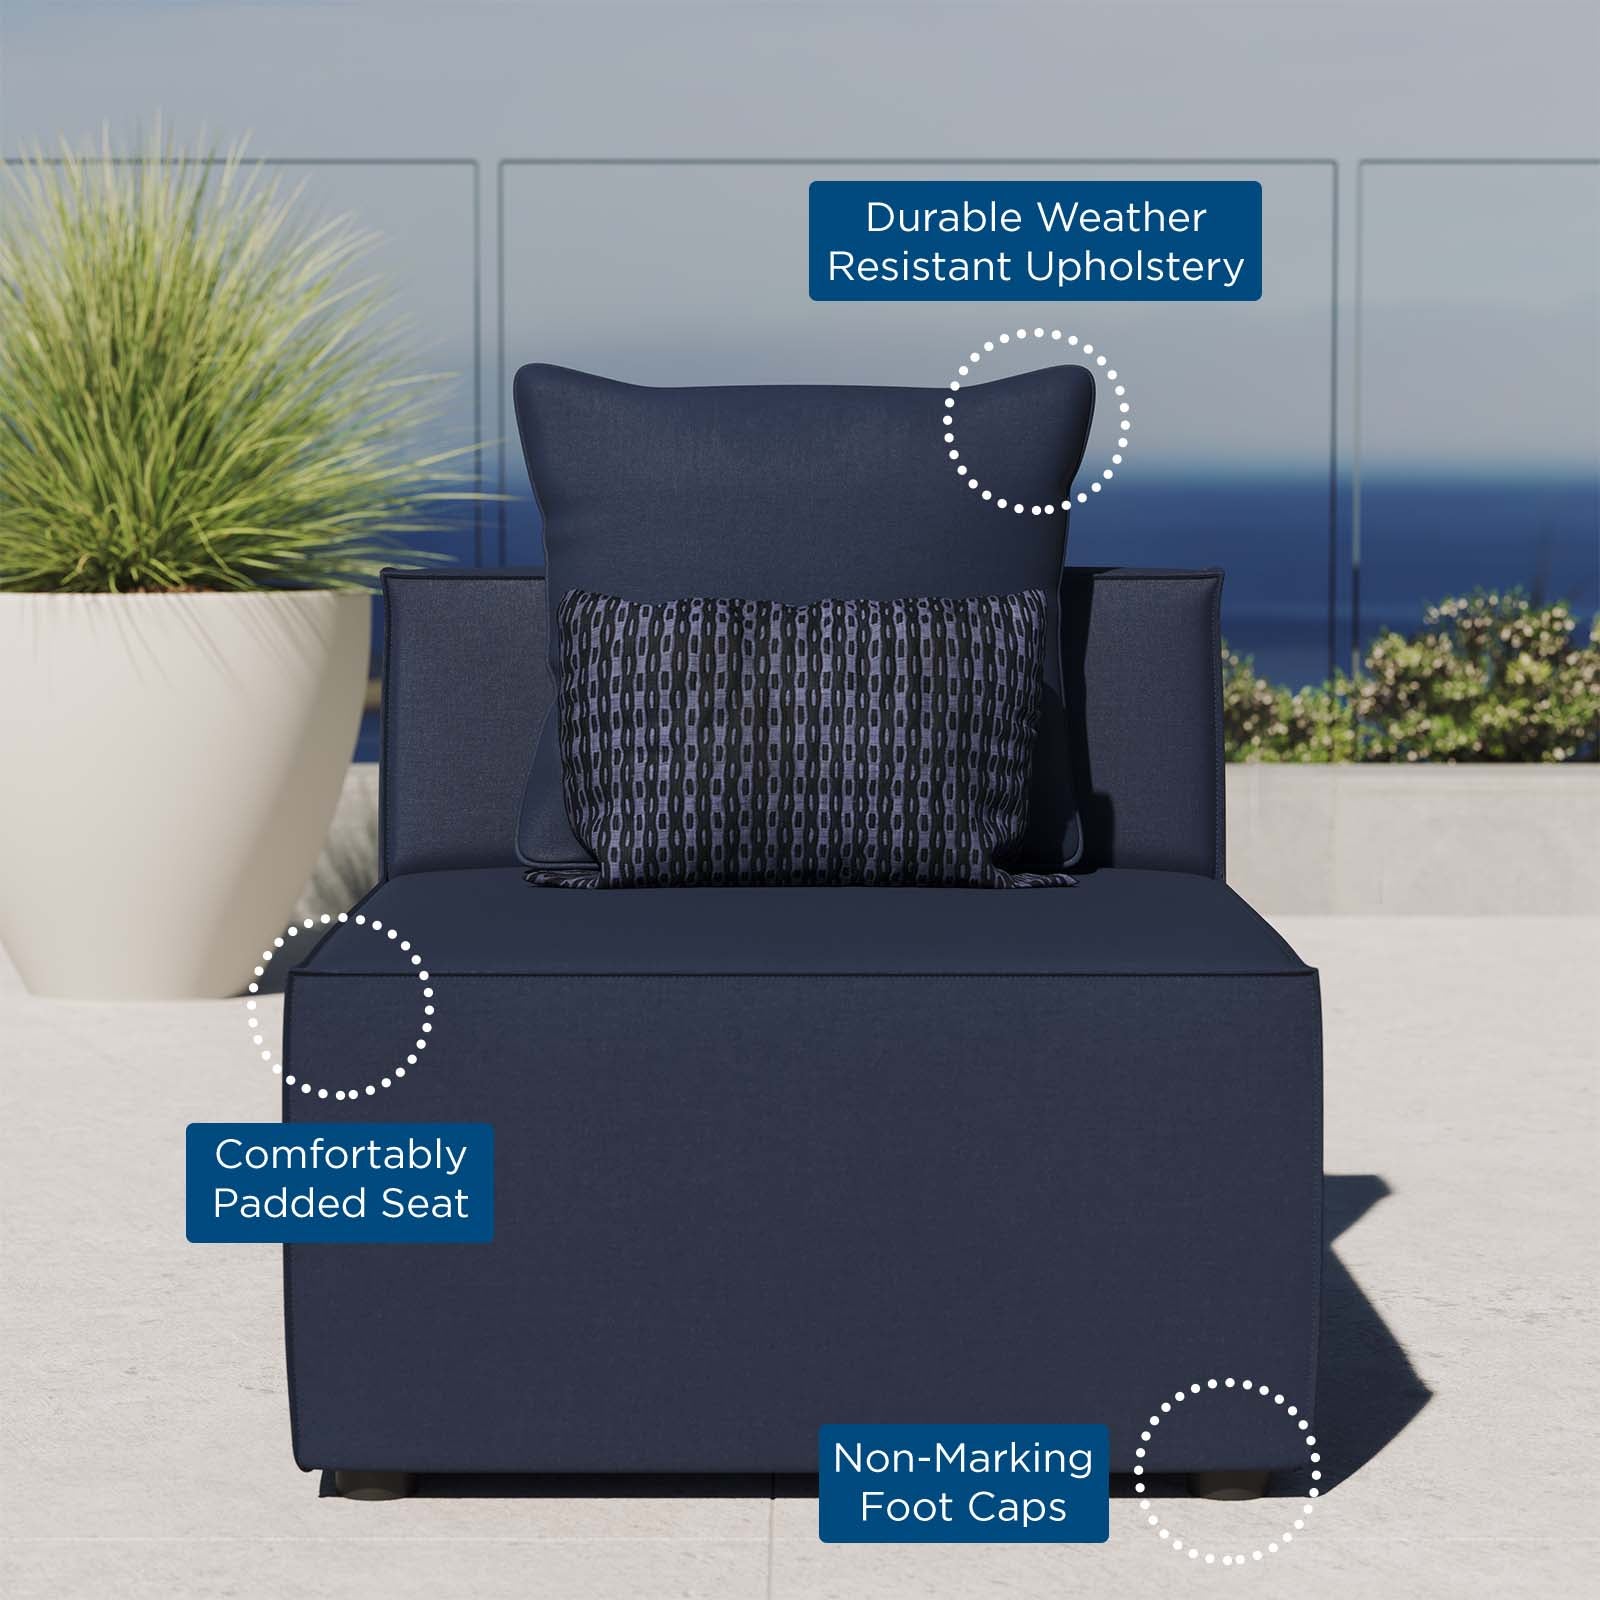 Modway Outdoor Chairs - Saybrook Outdoor Patio Upholstered Sectional Sofa Armless Chair Navy Blue